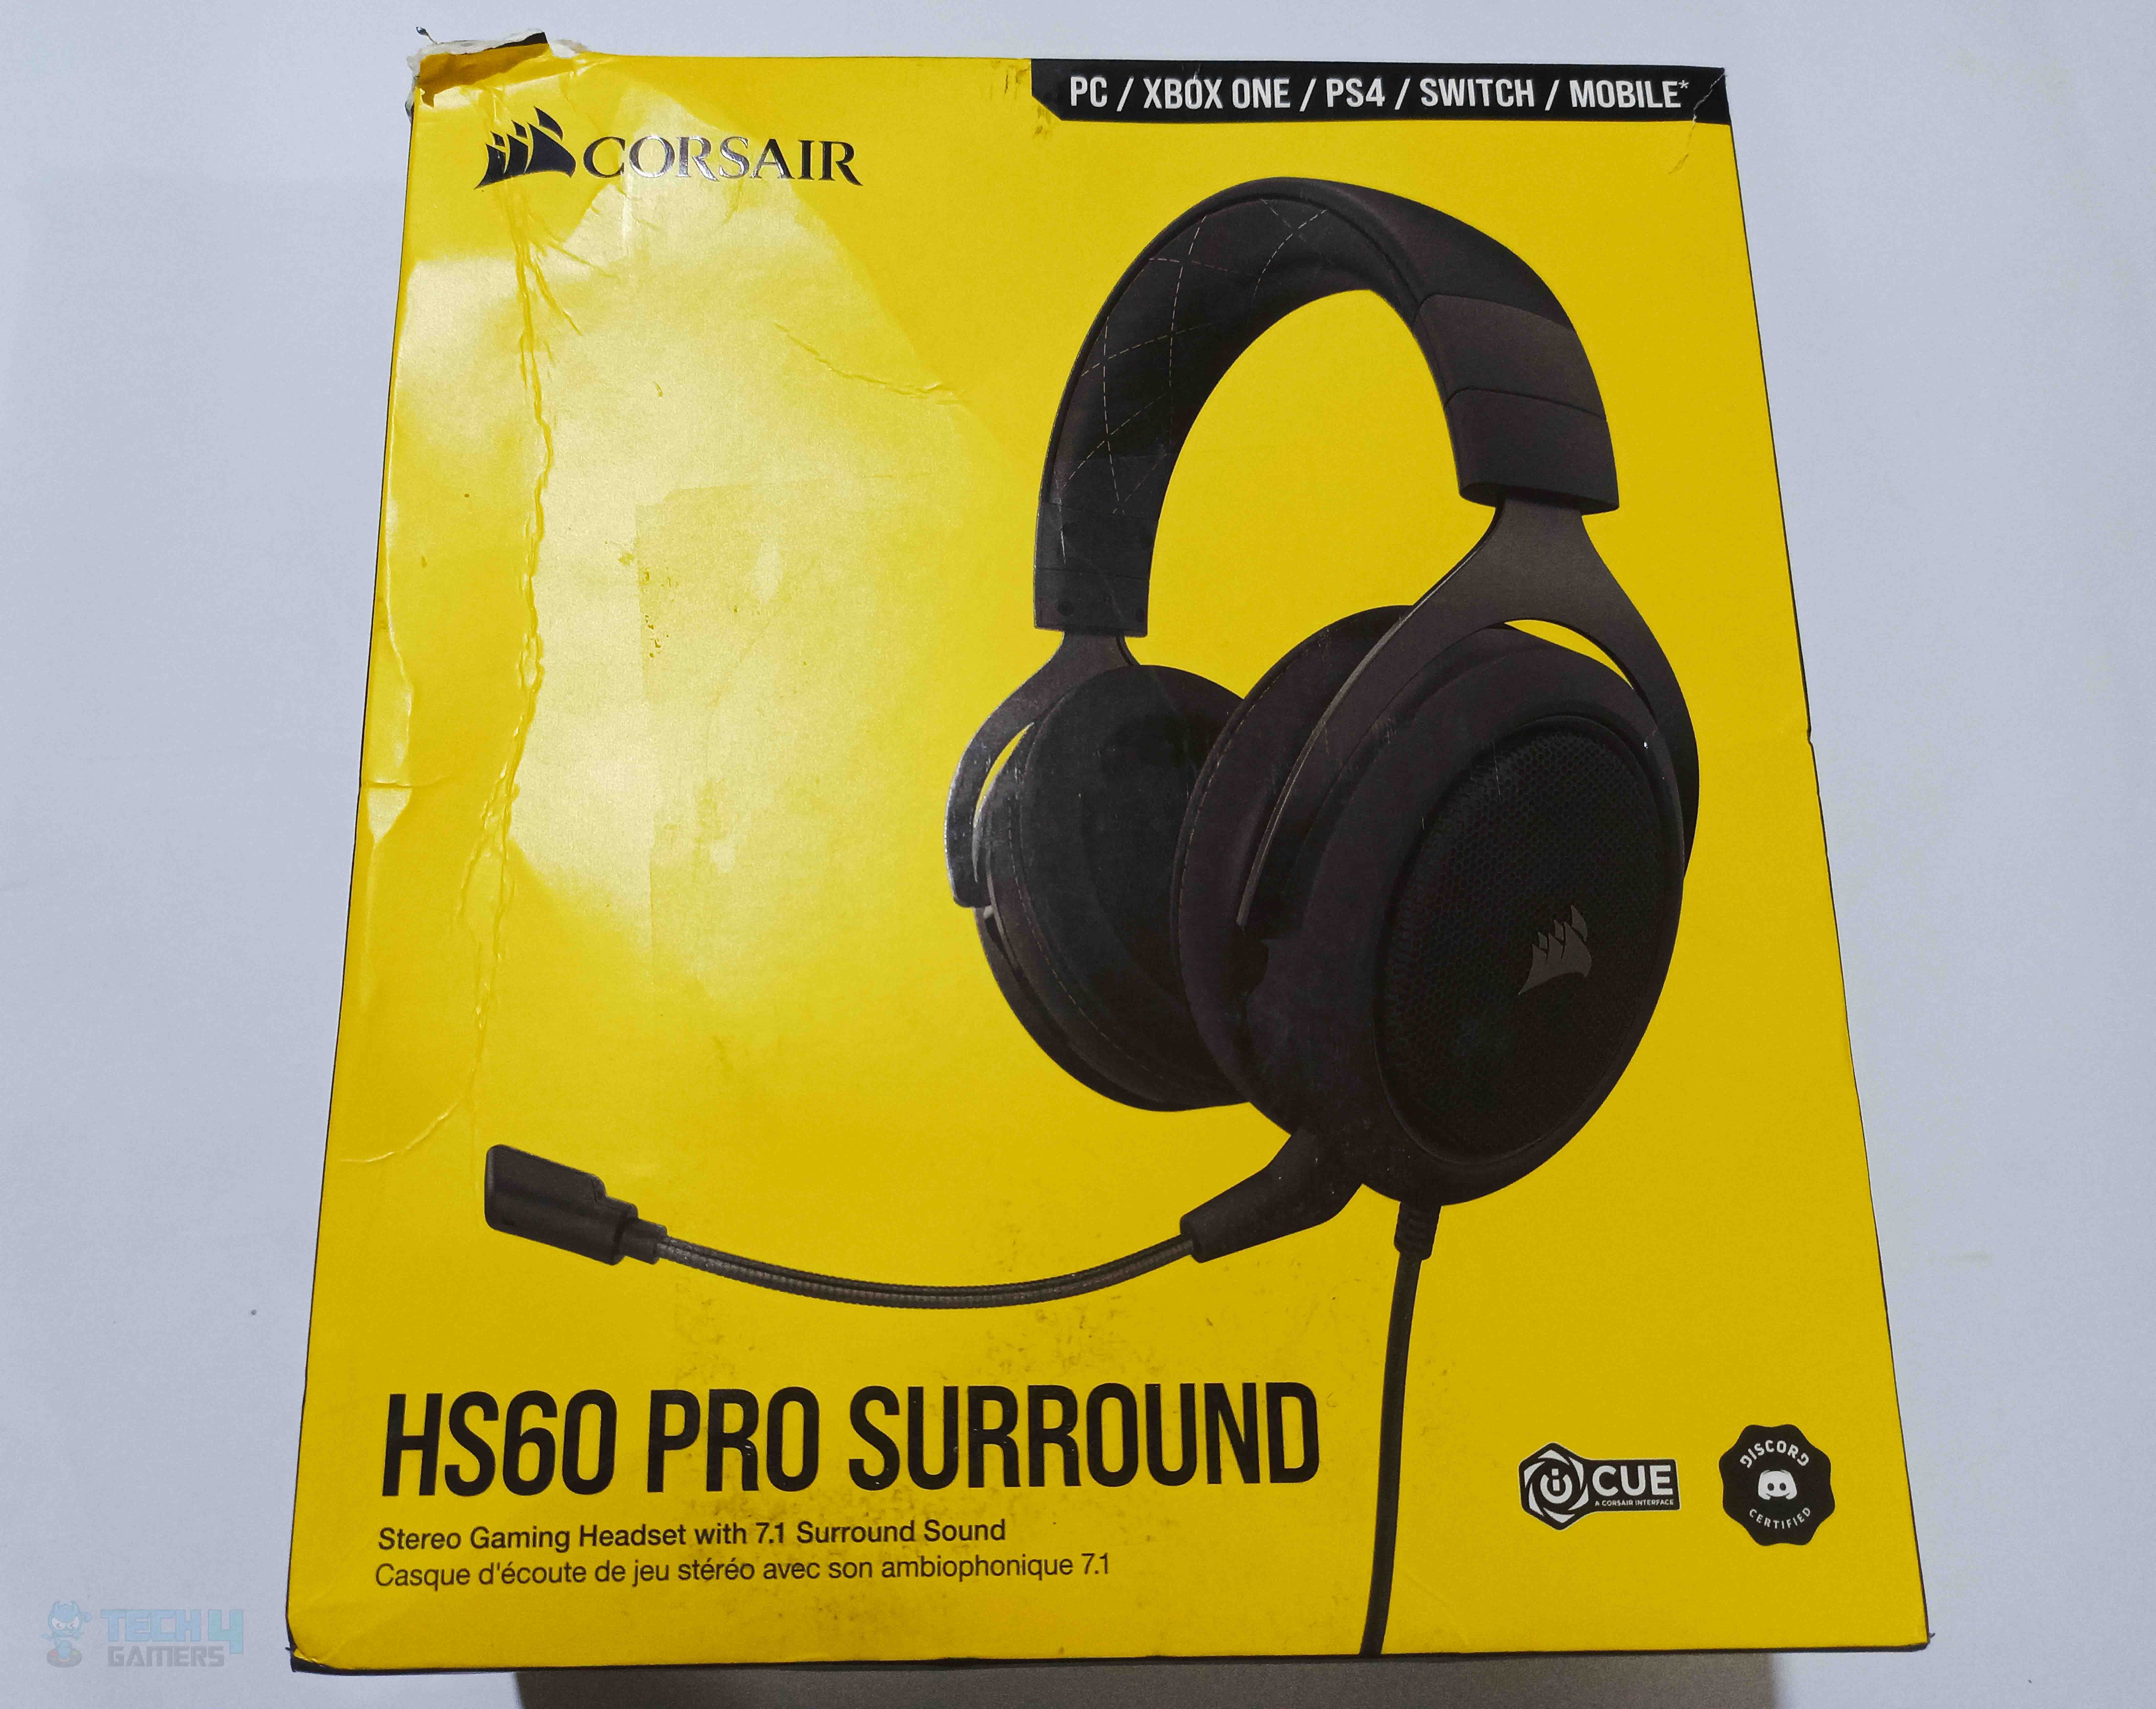 HS60 PRO Headset Packaging and Unboxing